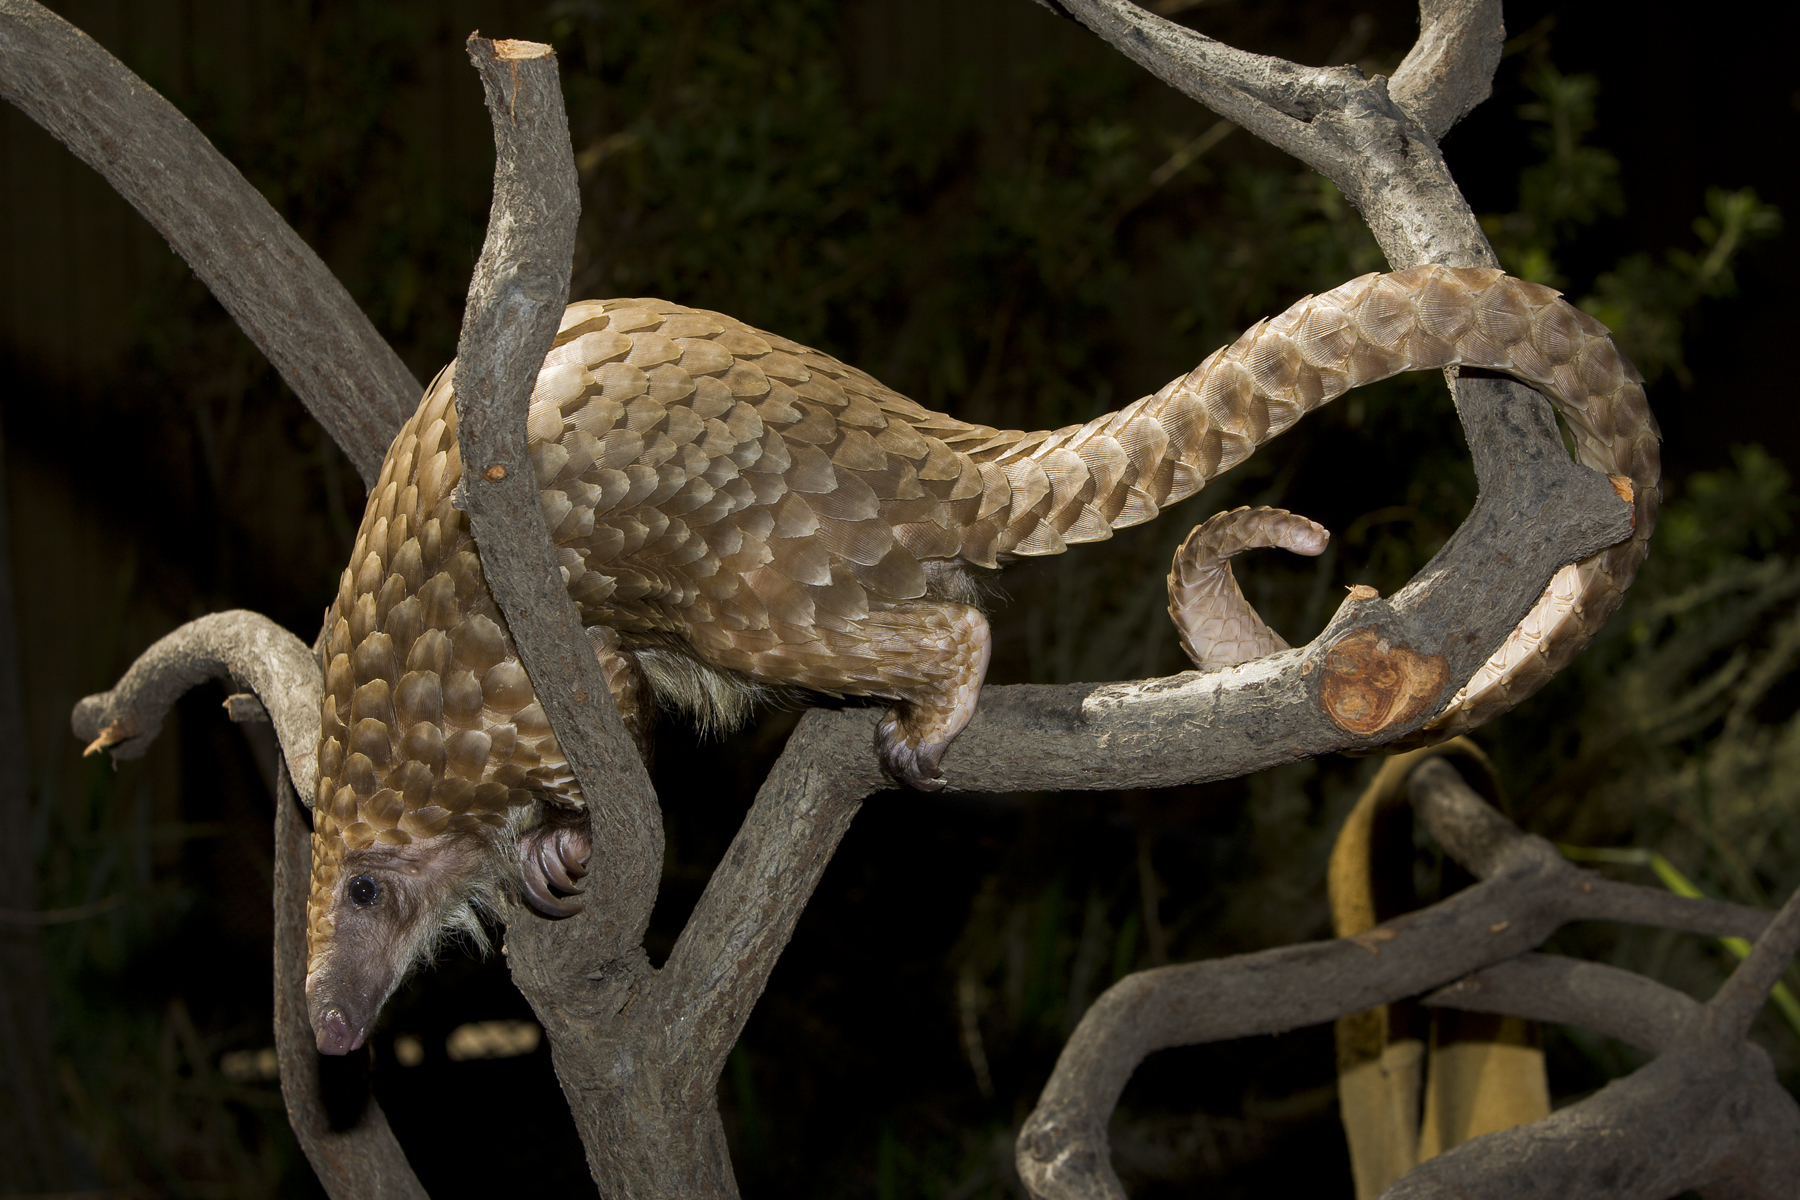 CITES Unites to Change the Fate of Pangolins